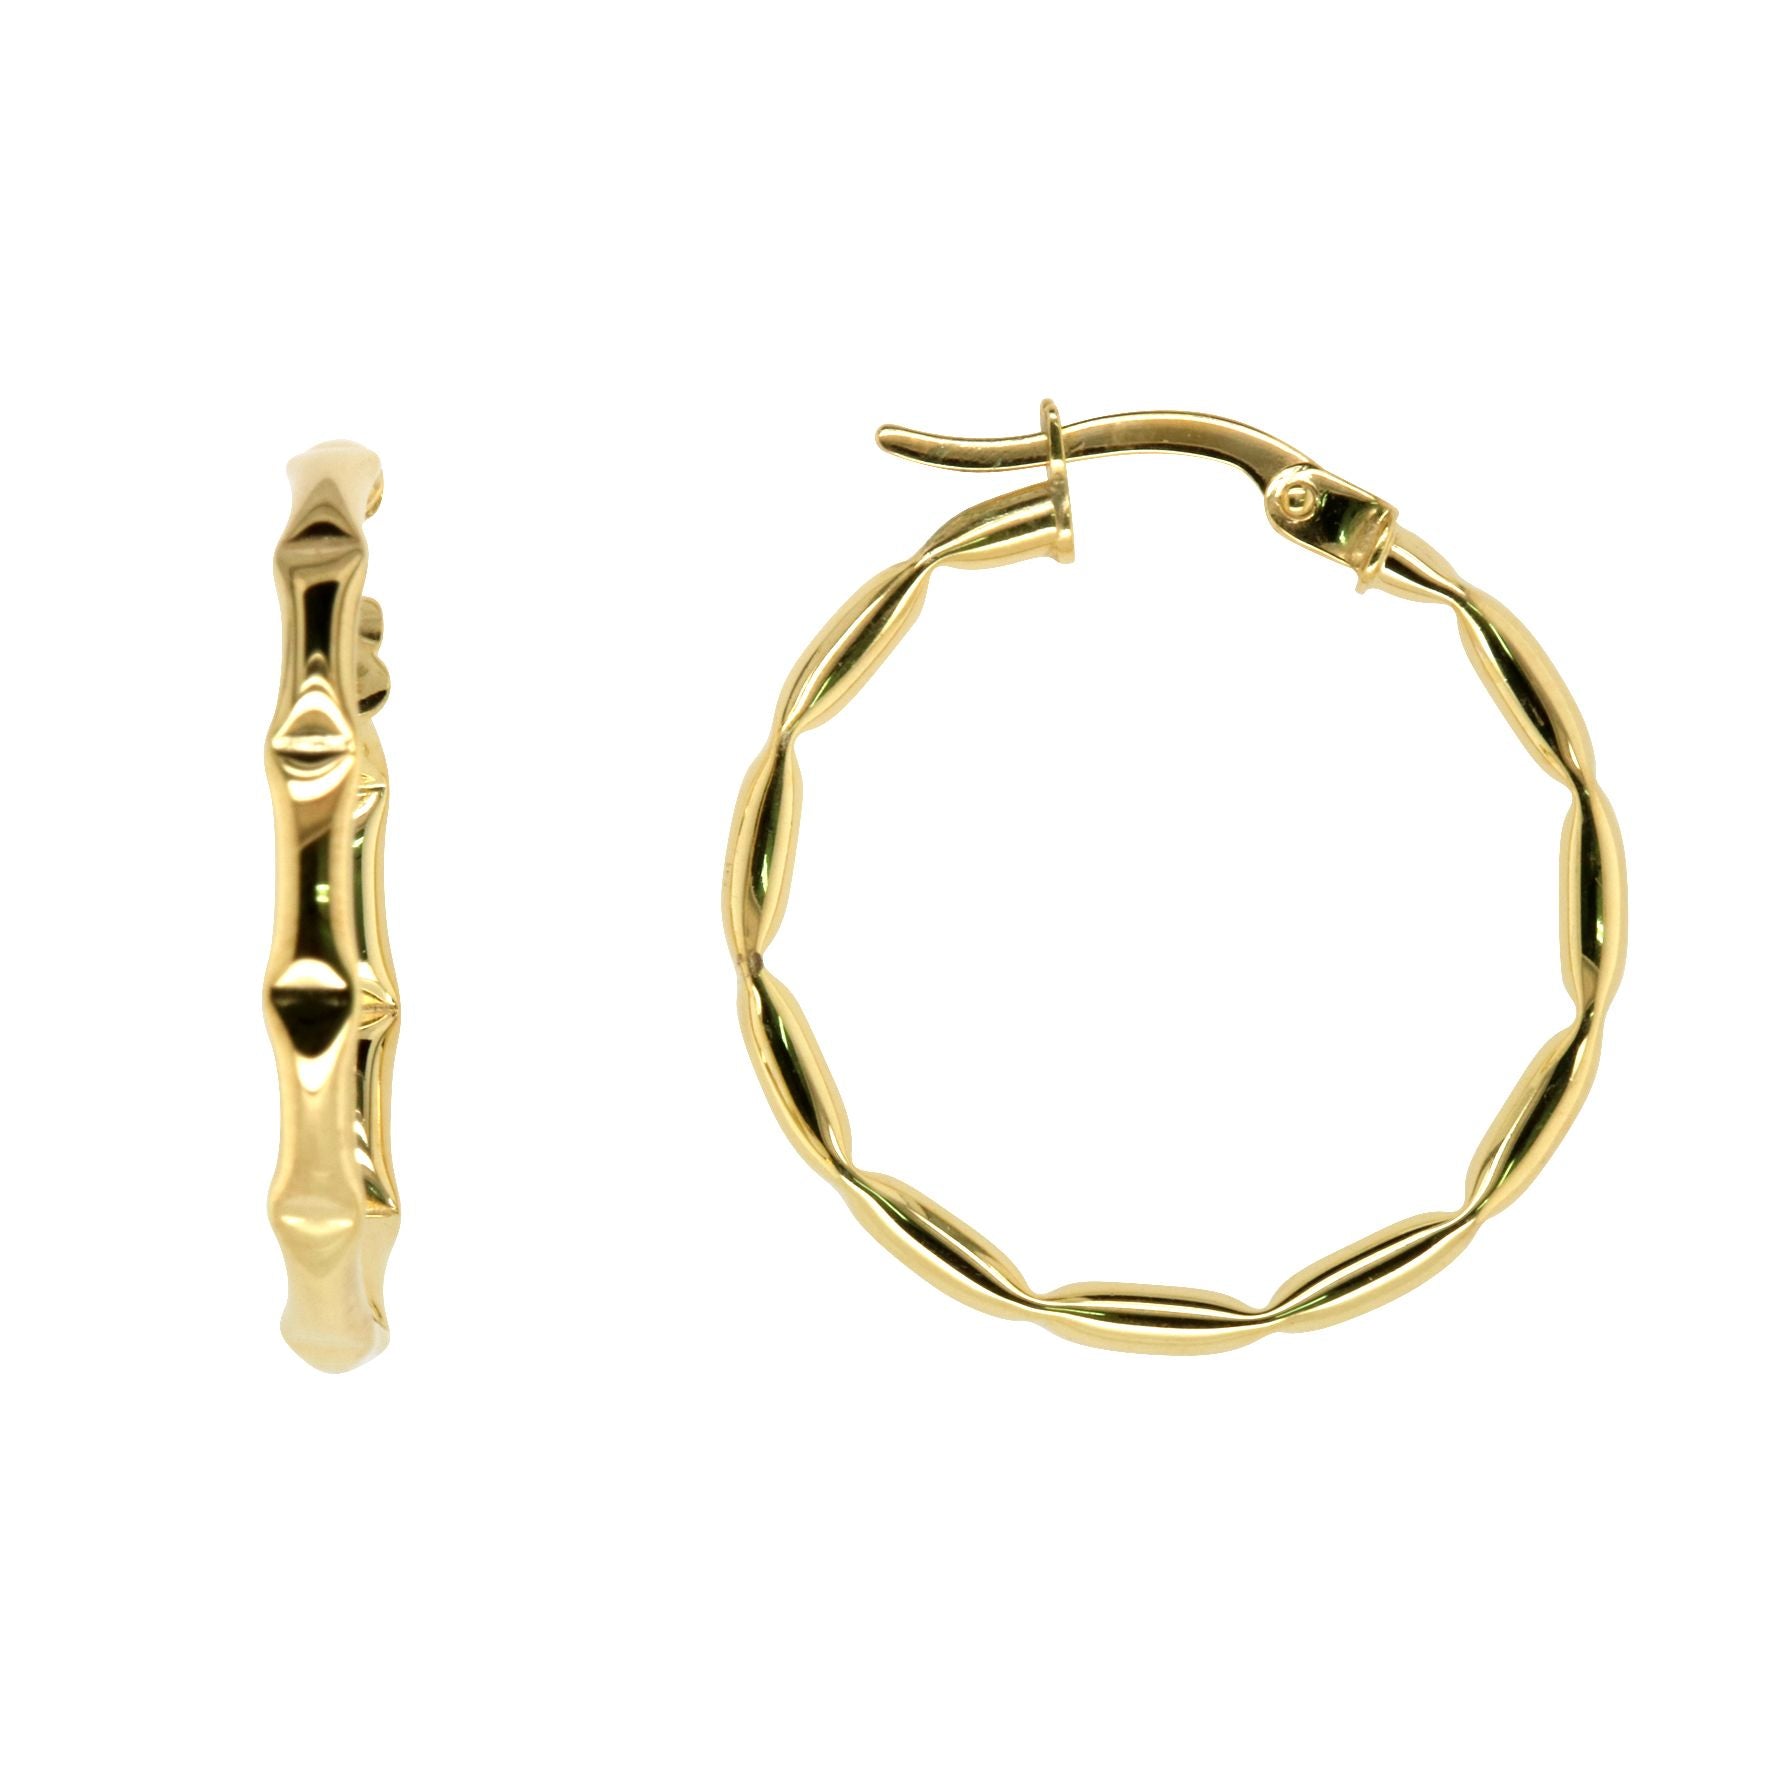 Yellow Gold Bonded Patterned Hoops